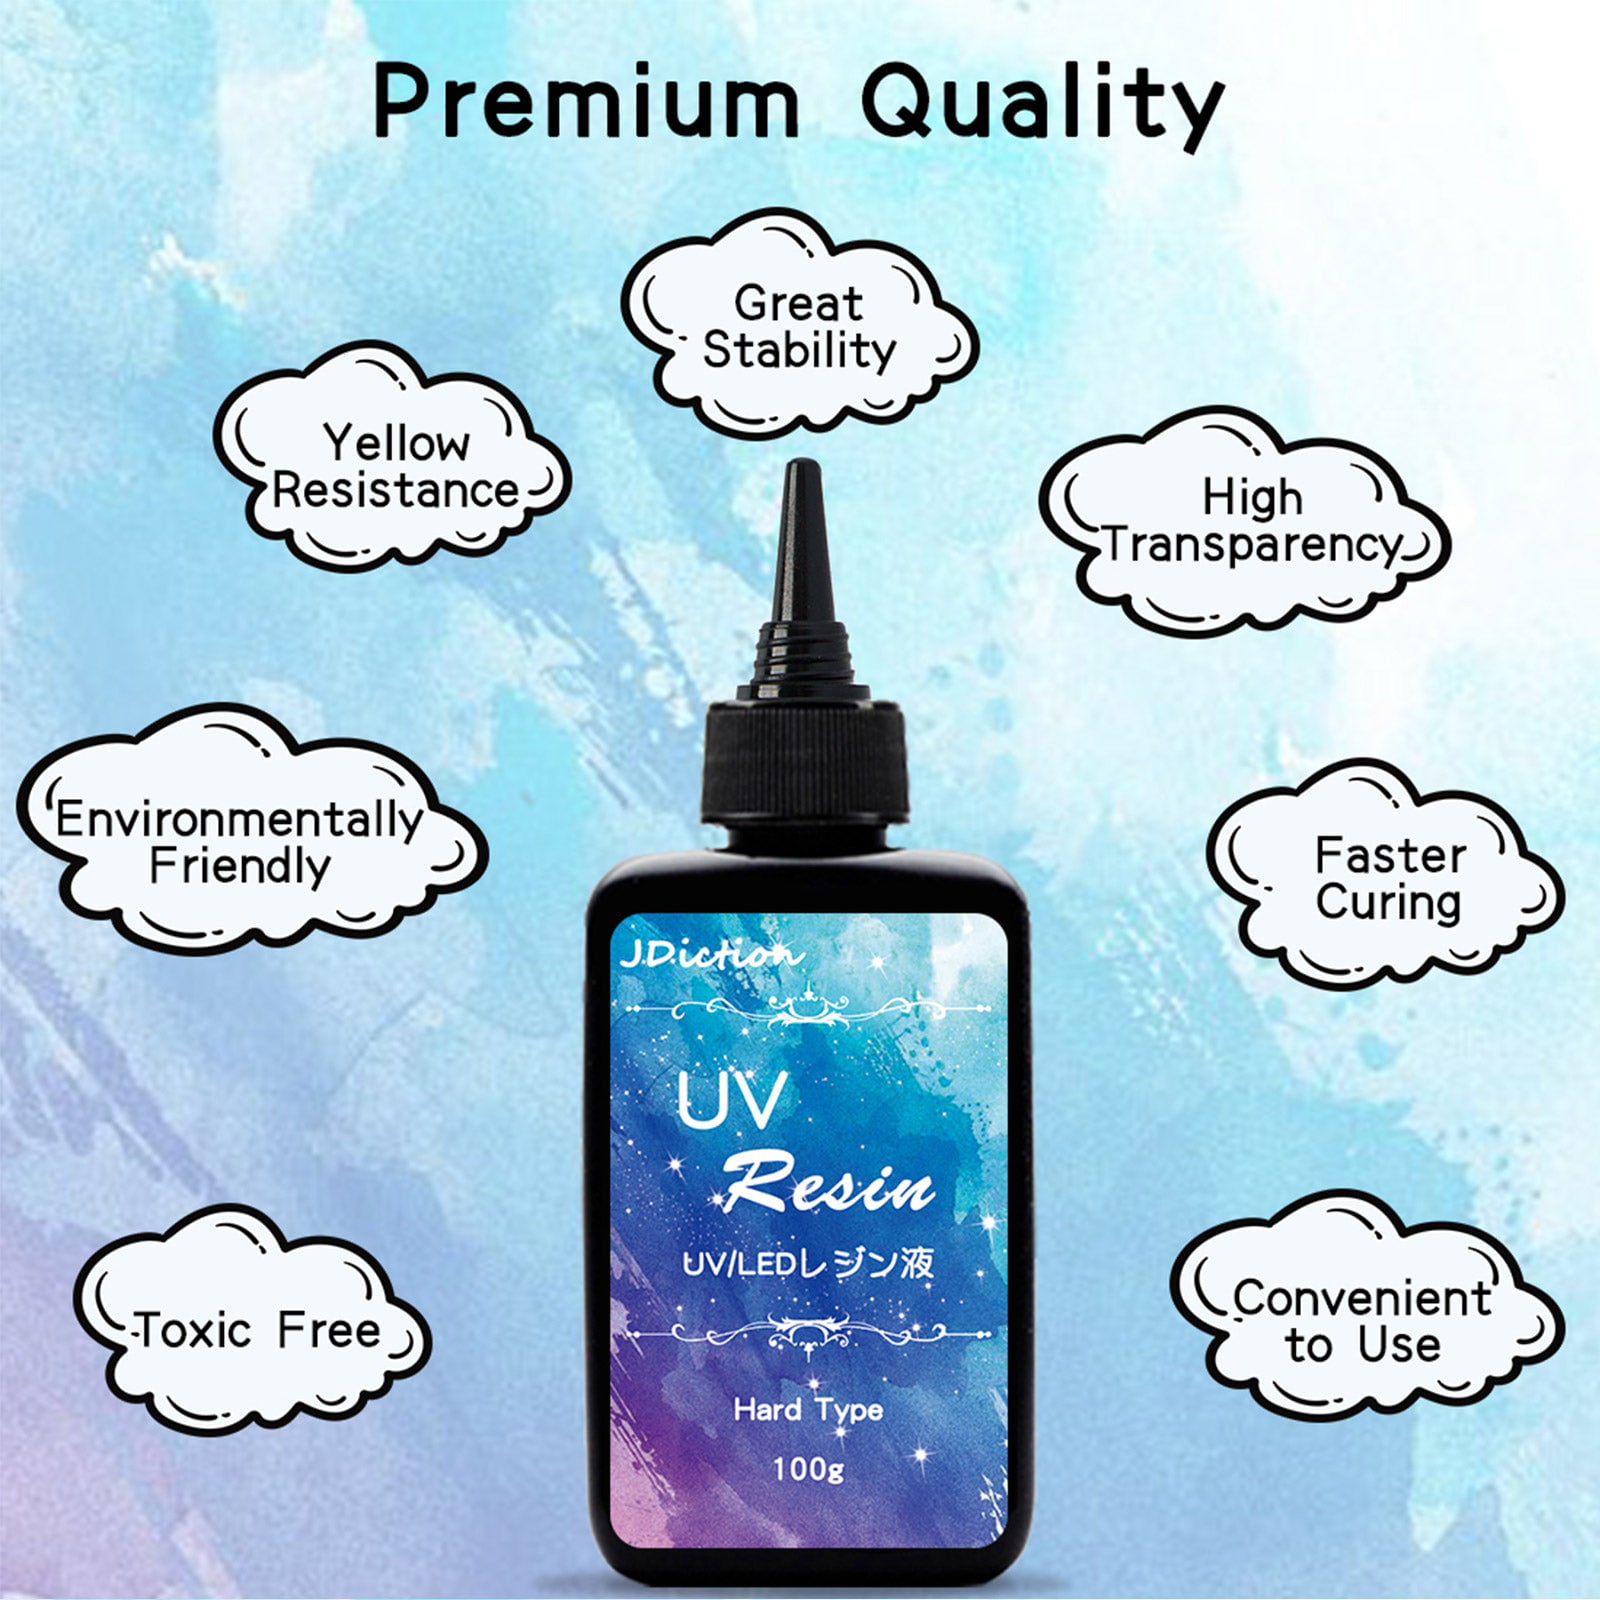 JDiction UV Resin, Upgrade 300g Low Viscosity Hard Thin UV Resin with Super  Crystal Clear Resin Kit for Jewelry, Casting, Coating and DIY Craft